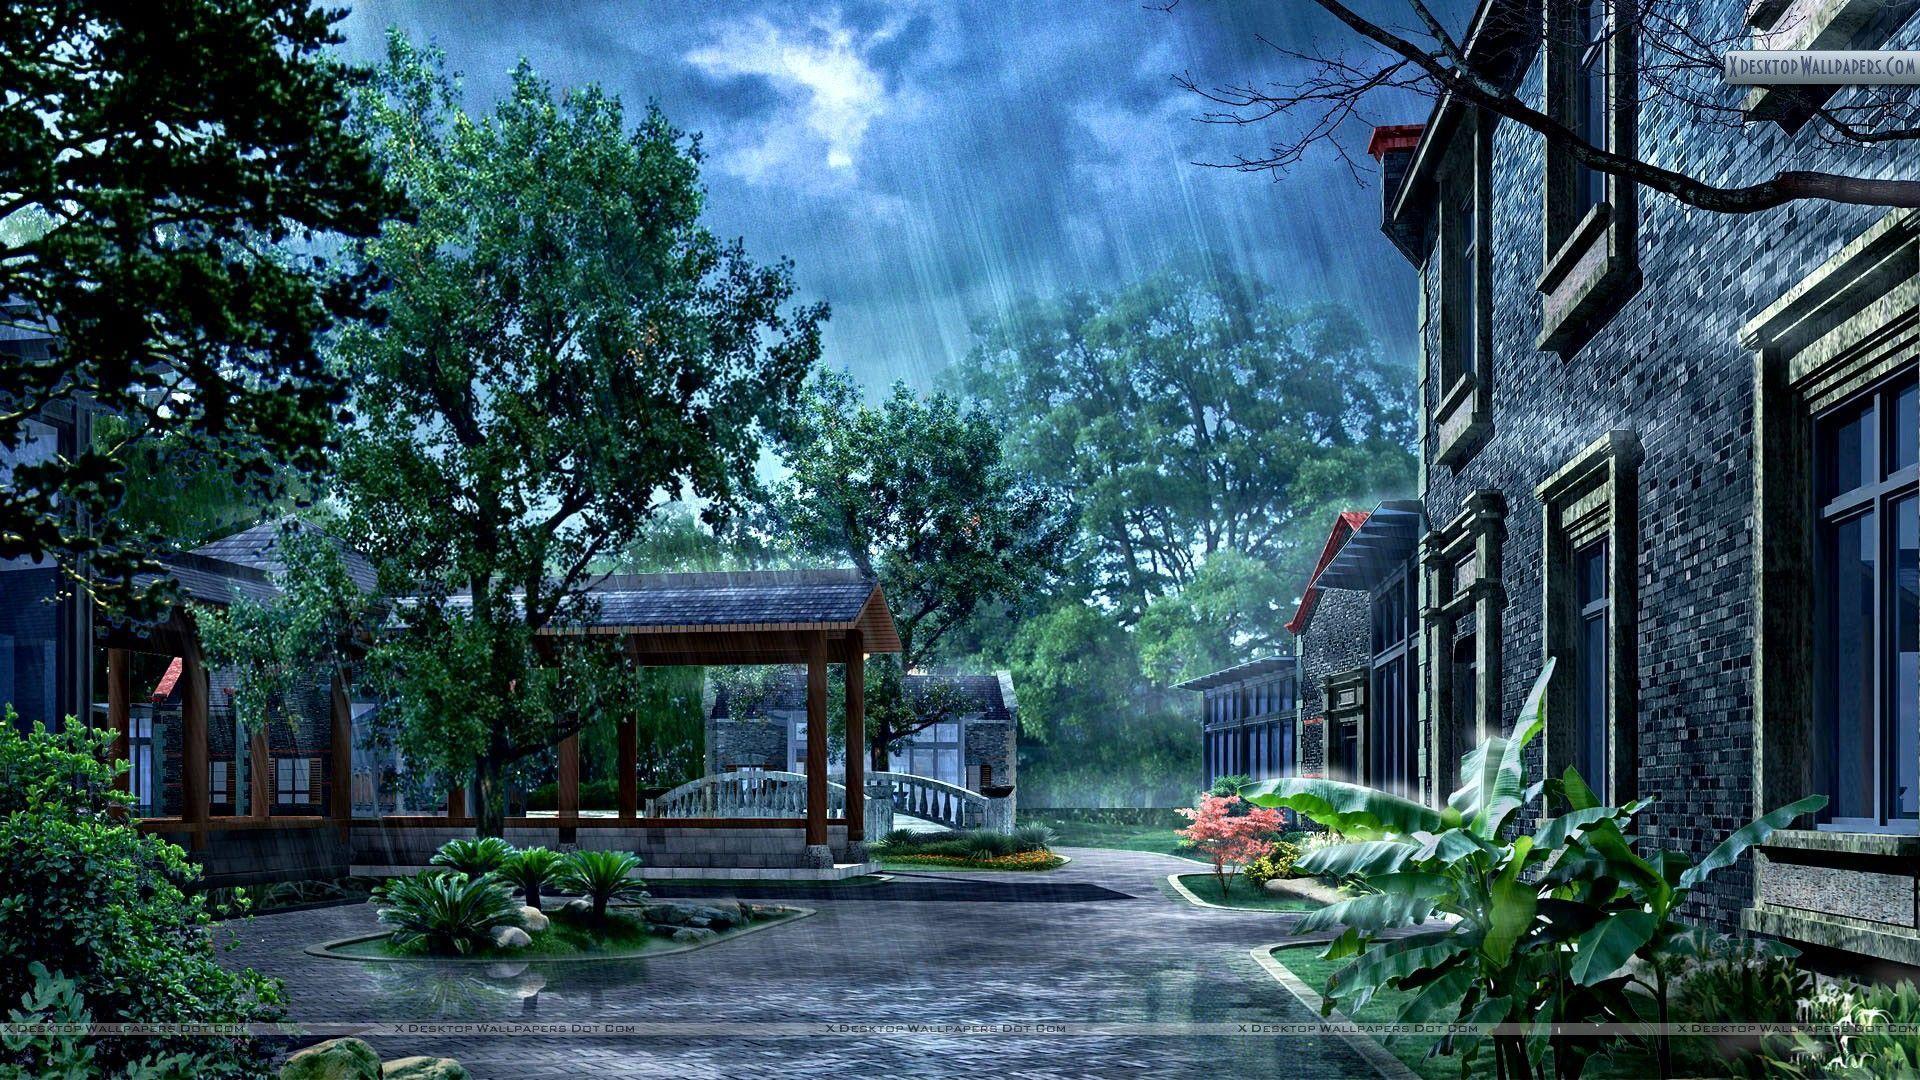 Wallpaper For > Wallpaper Of Happy Rainy Day